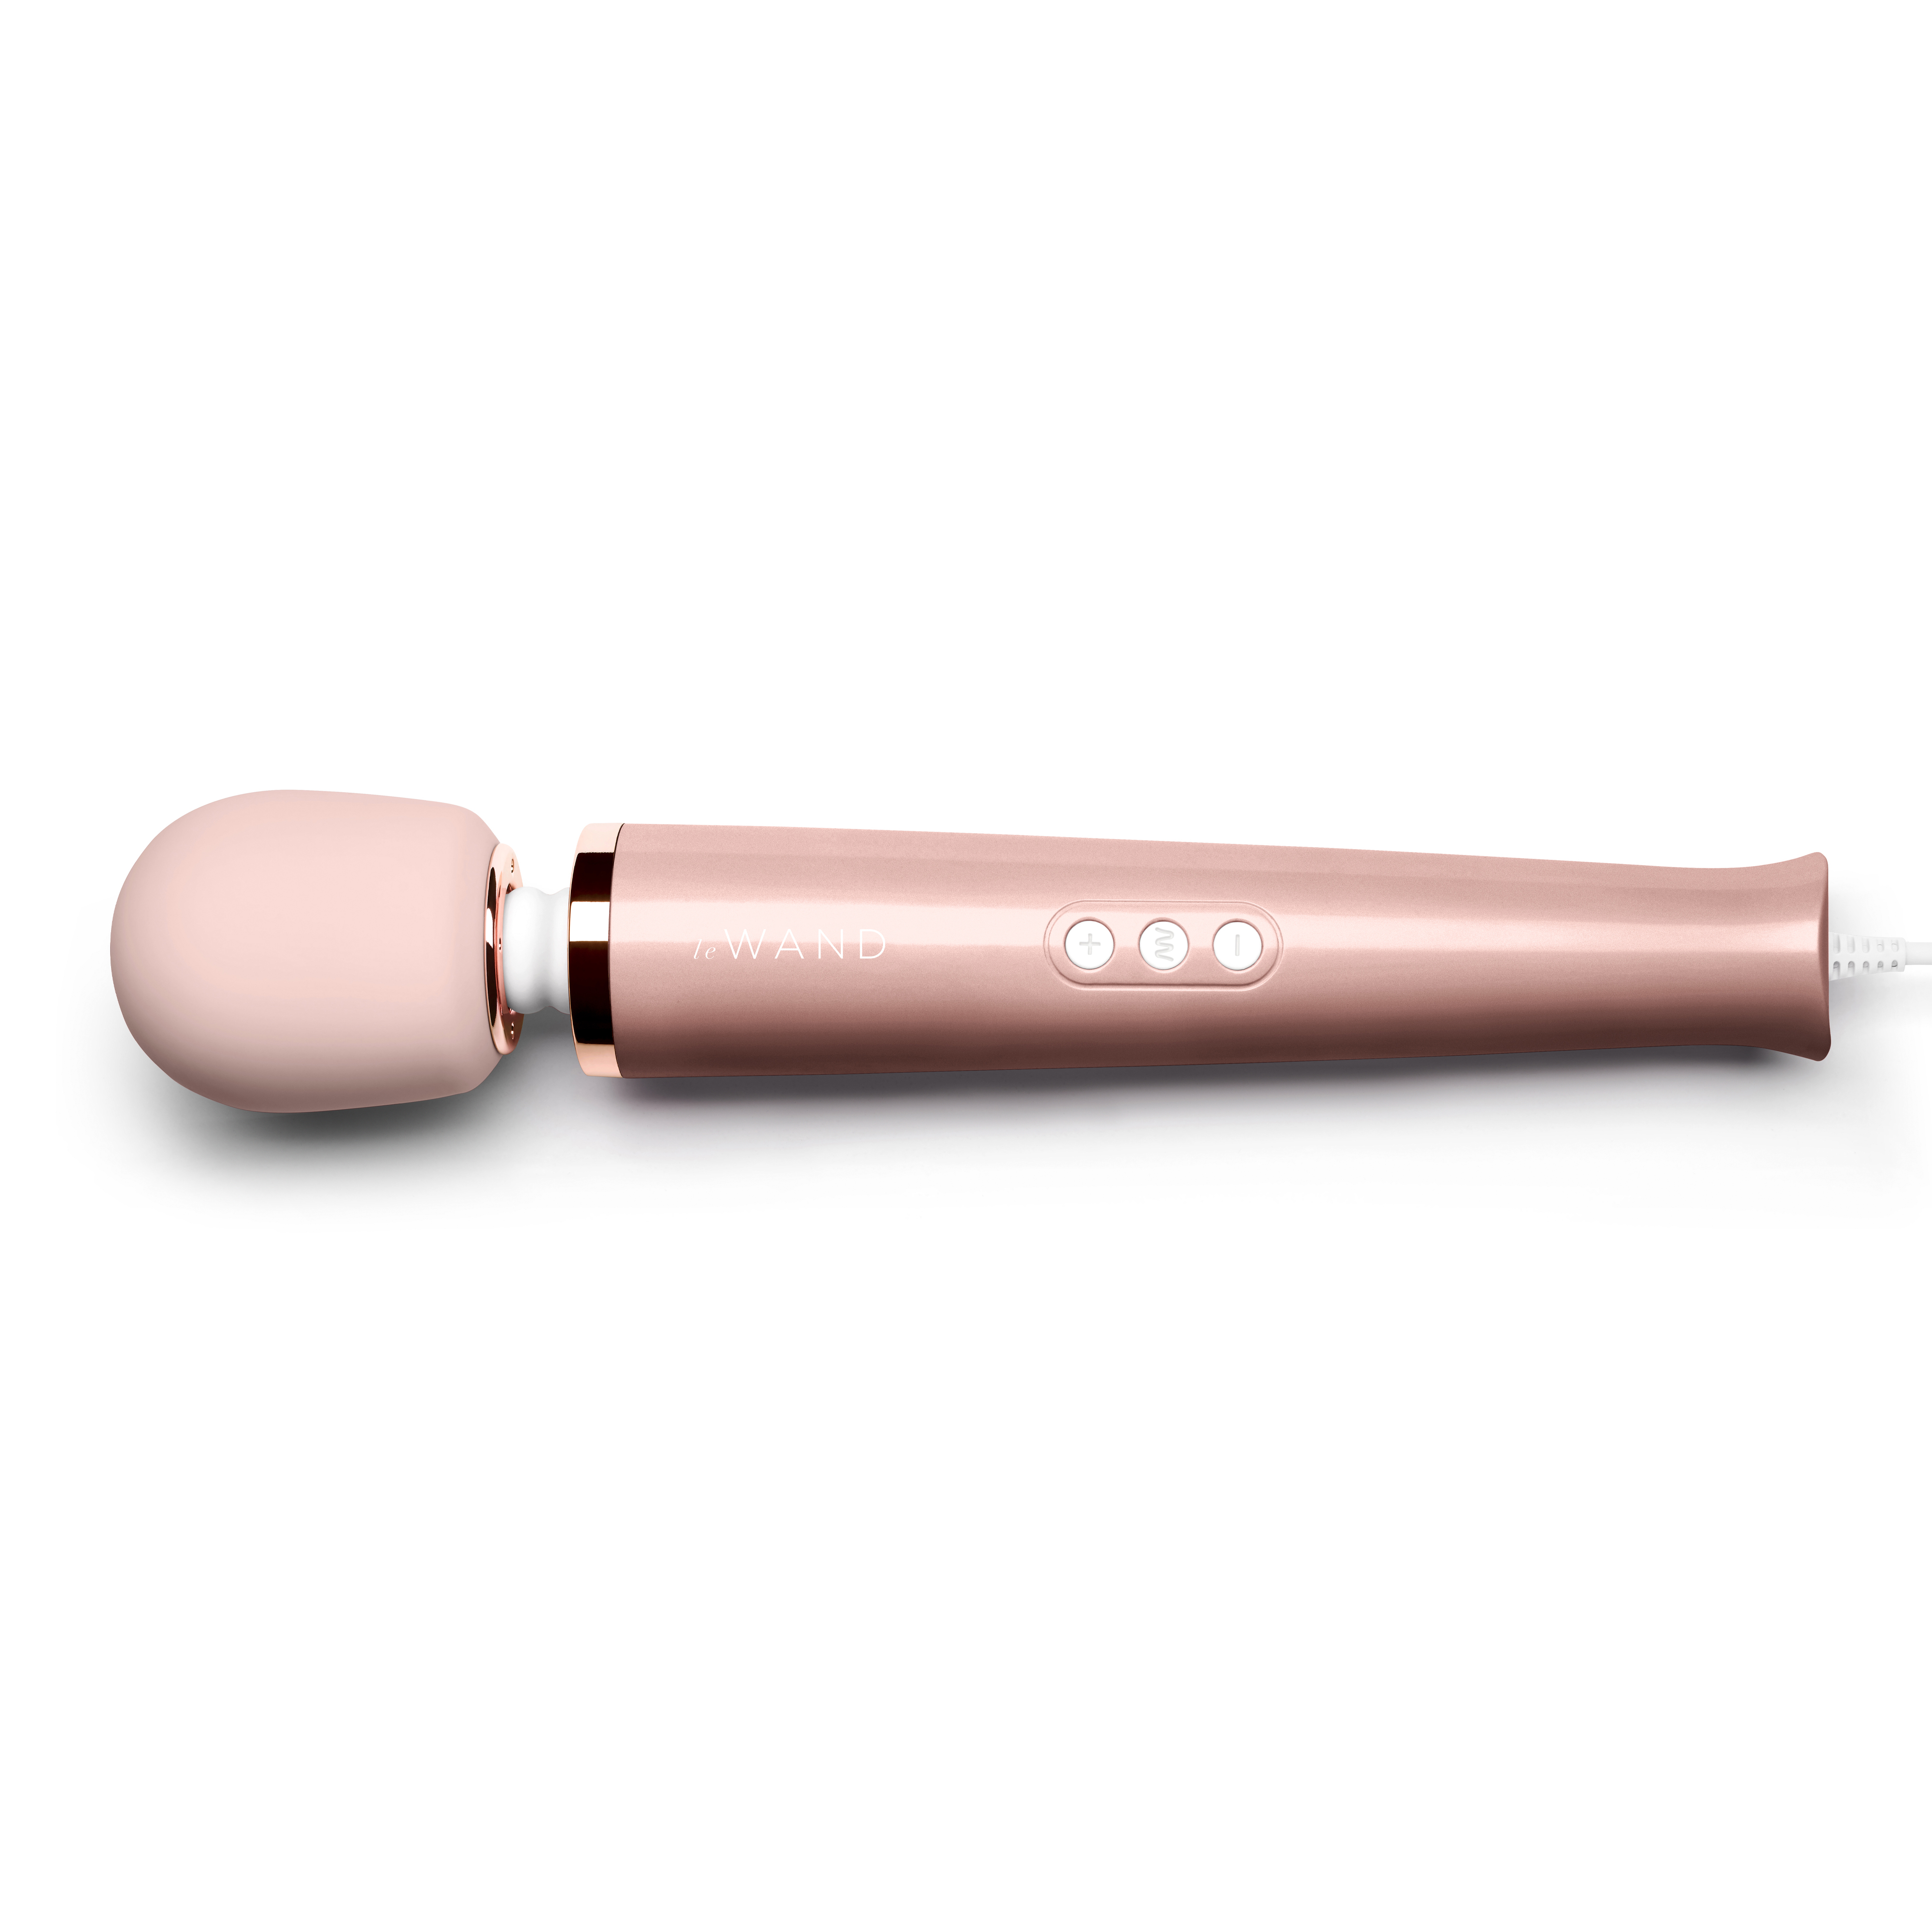 Le Wand Powerful Plug-In Vibrating Massager Rose Gold